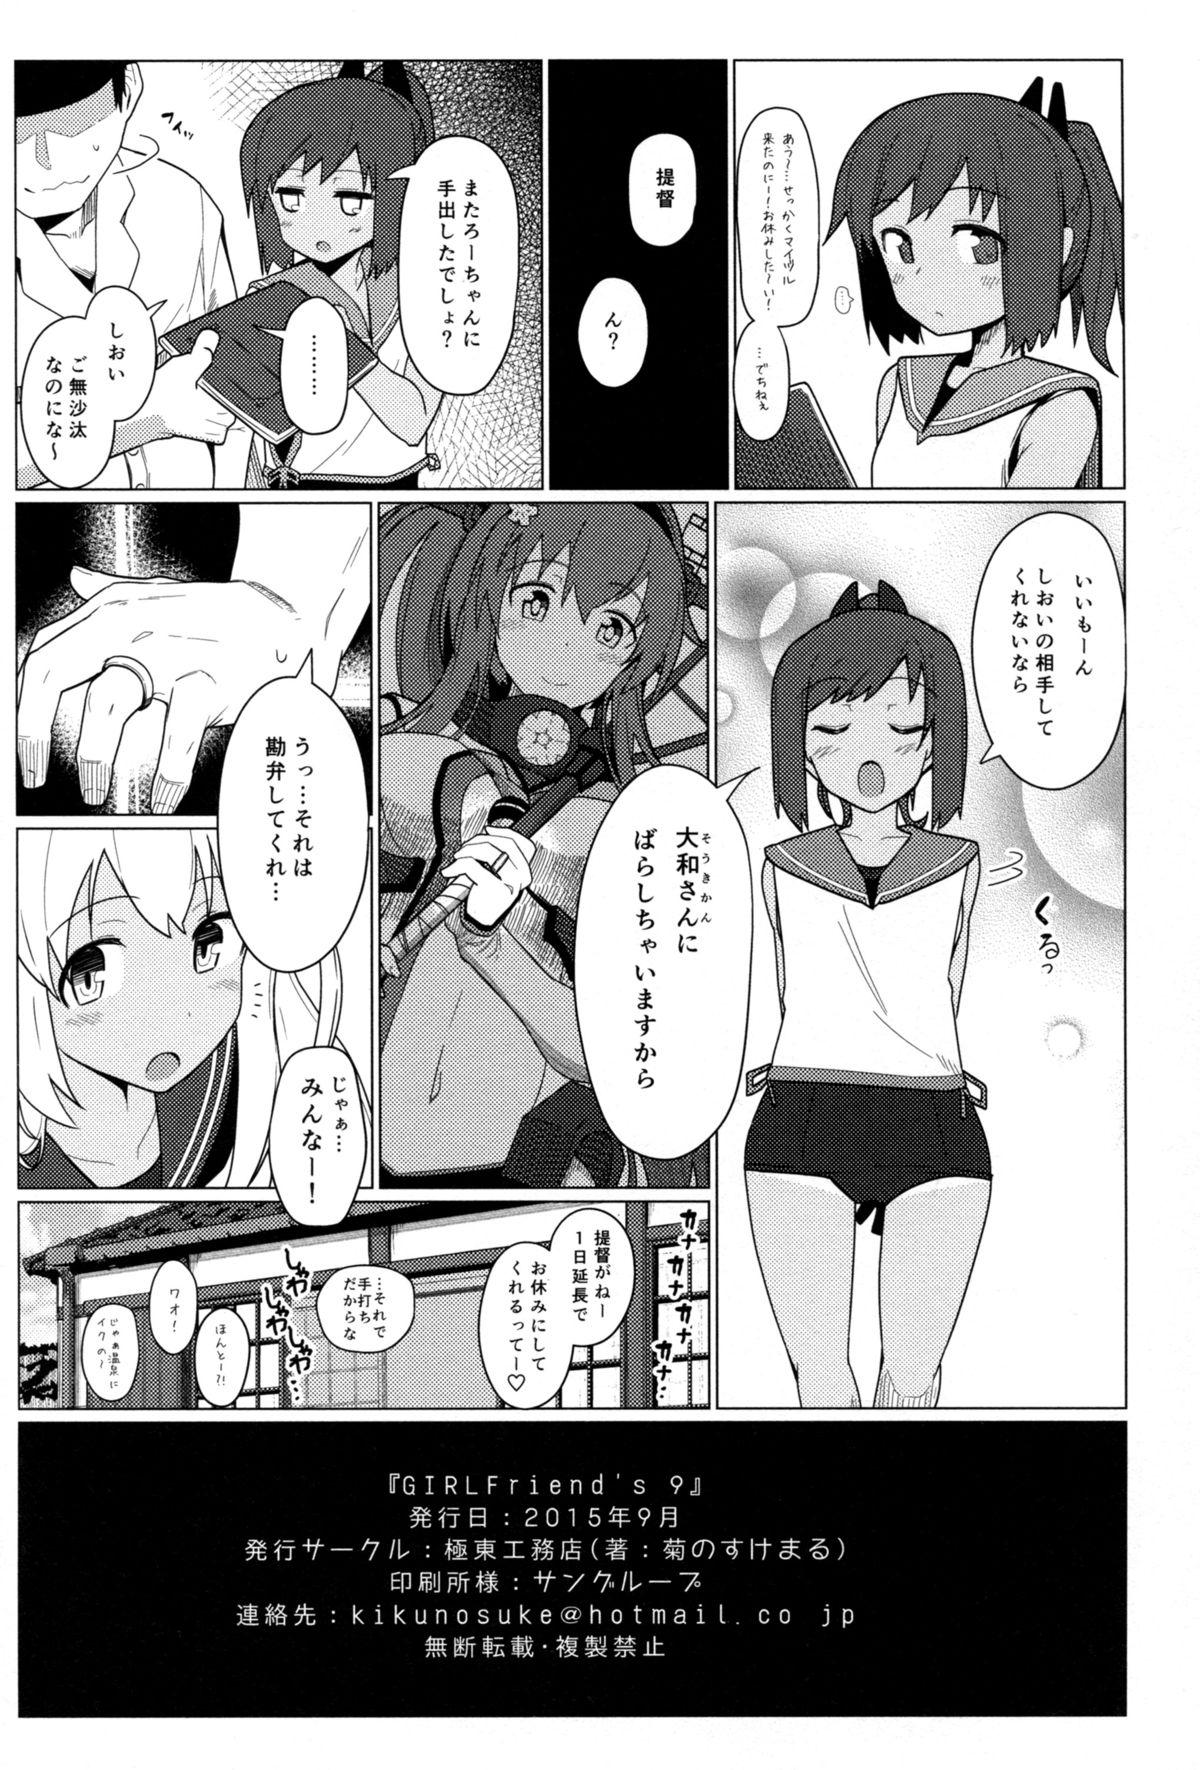 Hot Women Having Sex GIRLFriend’s 9 - Kantai collection Virginity - Page 22